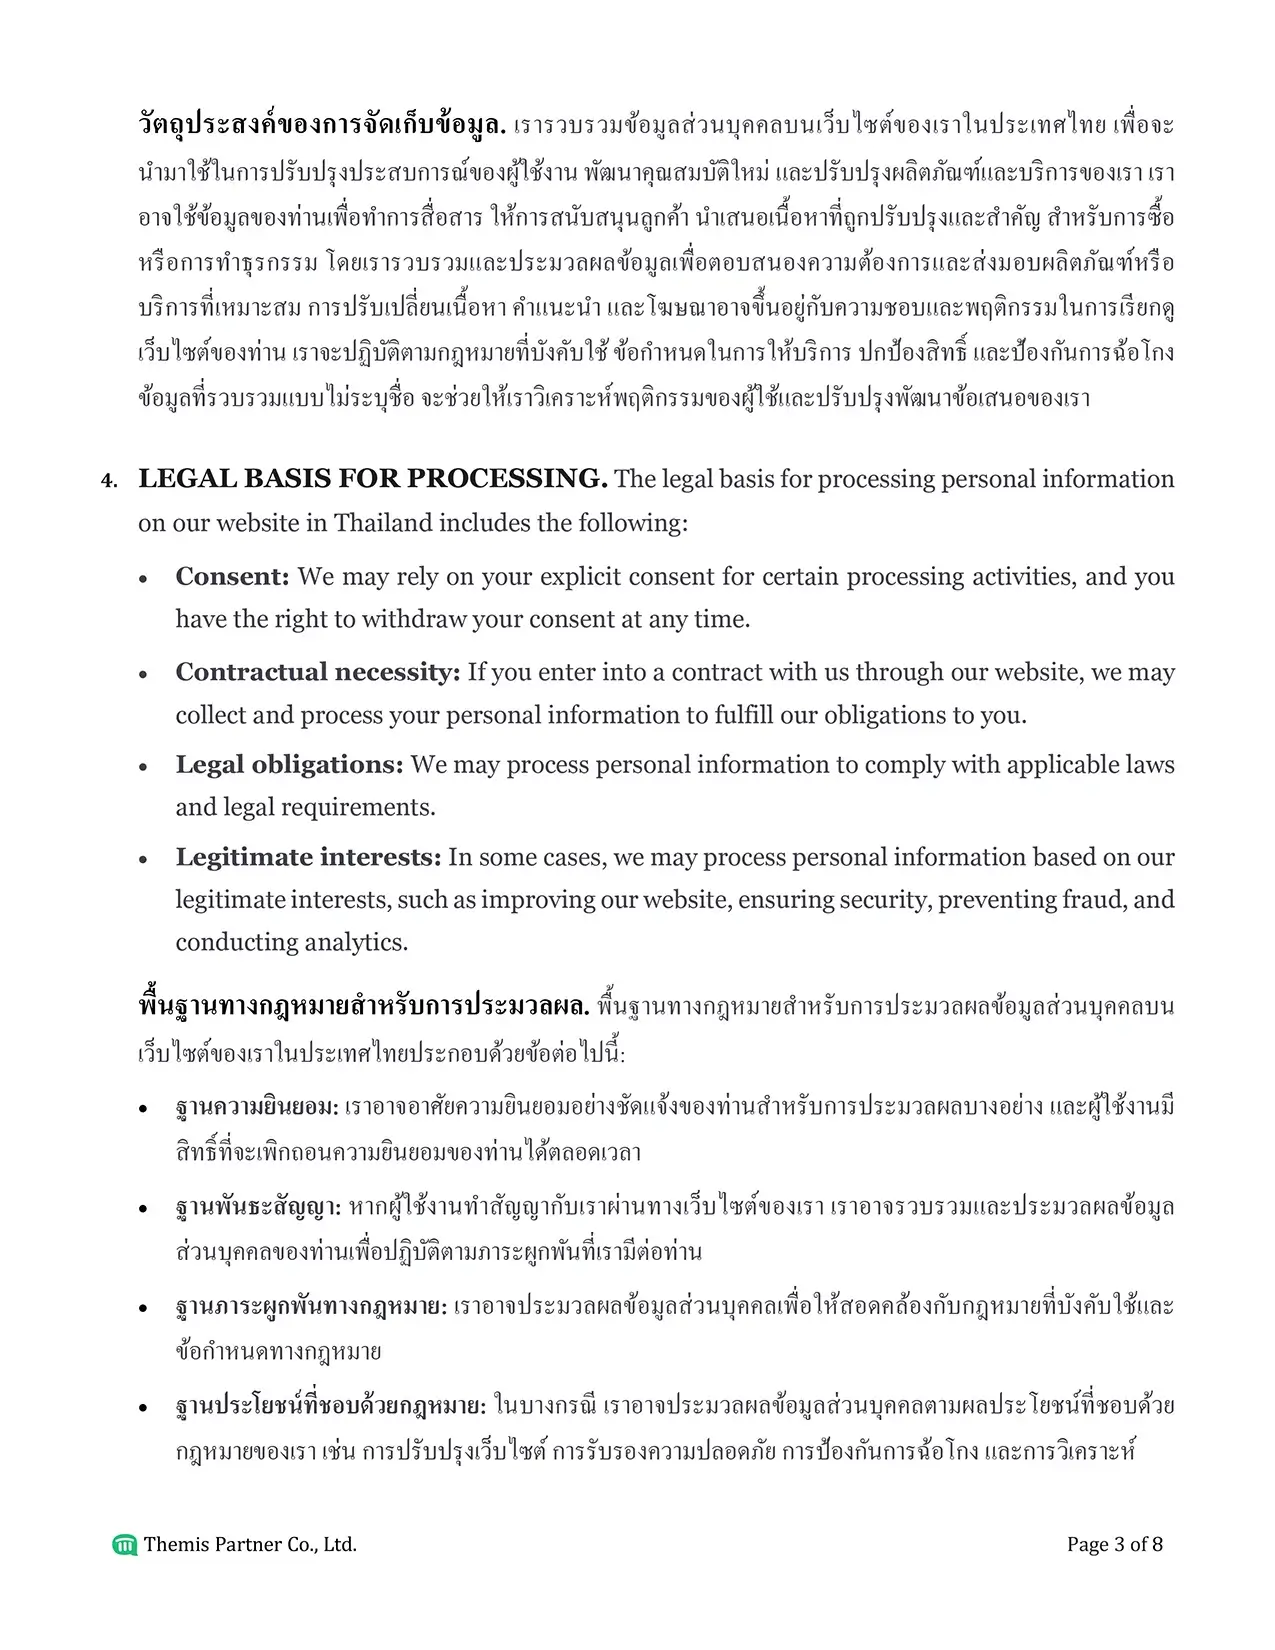 Privacy policy Thailand 3